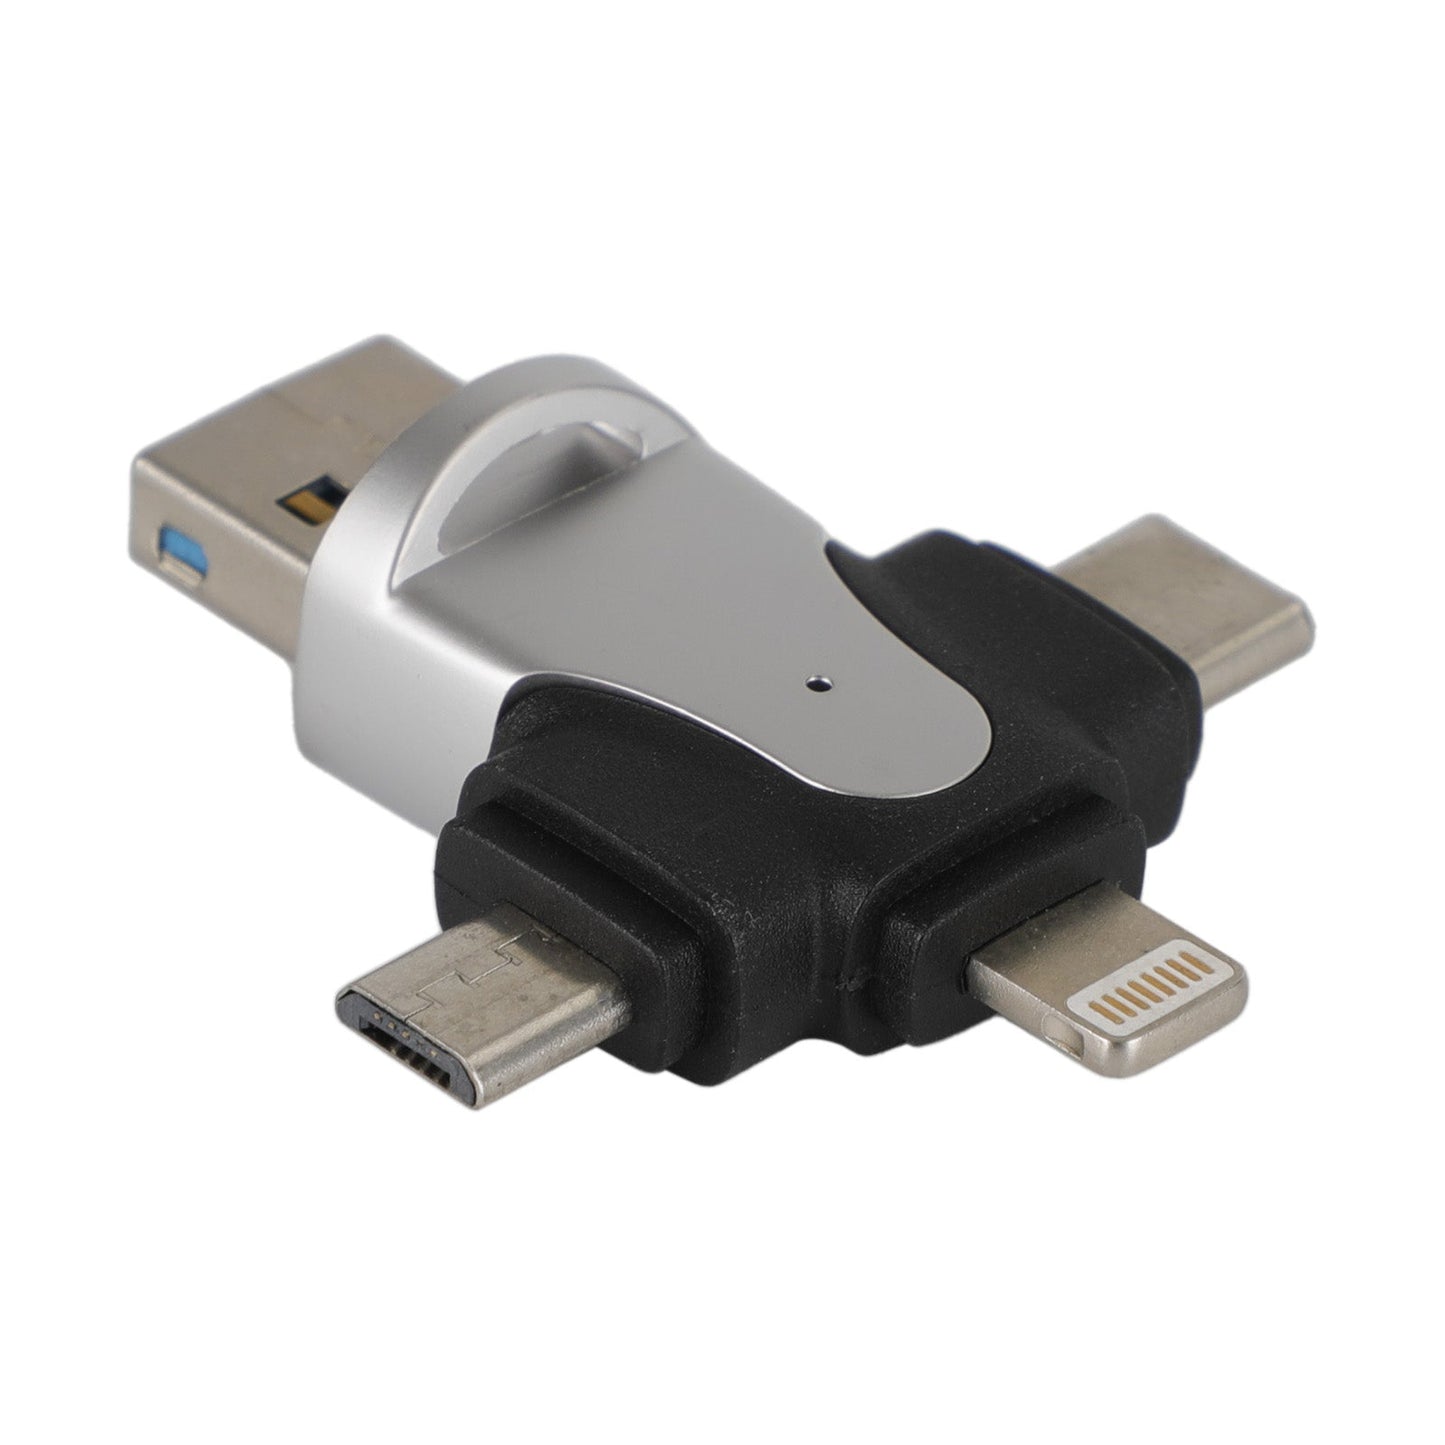 4 in 1 USB3.0 OTG Card Reader Adapter for iPhone iPad Mackbook Android Camera